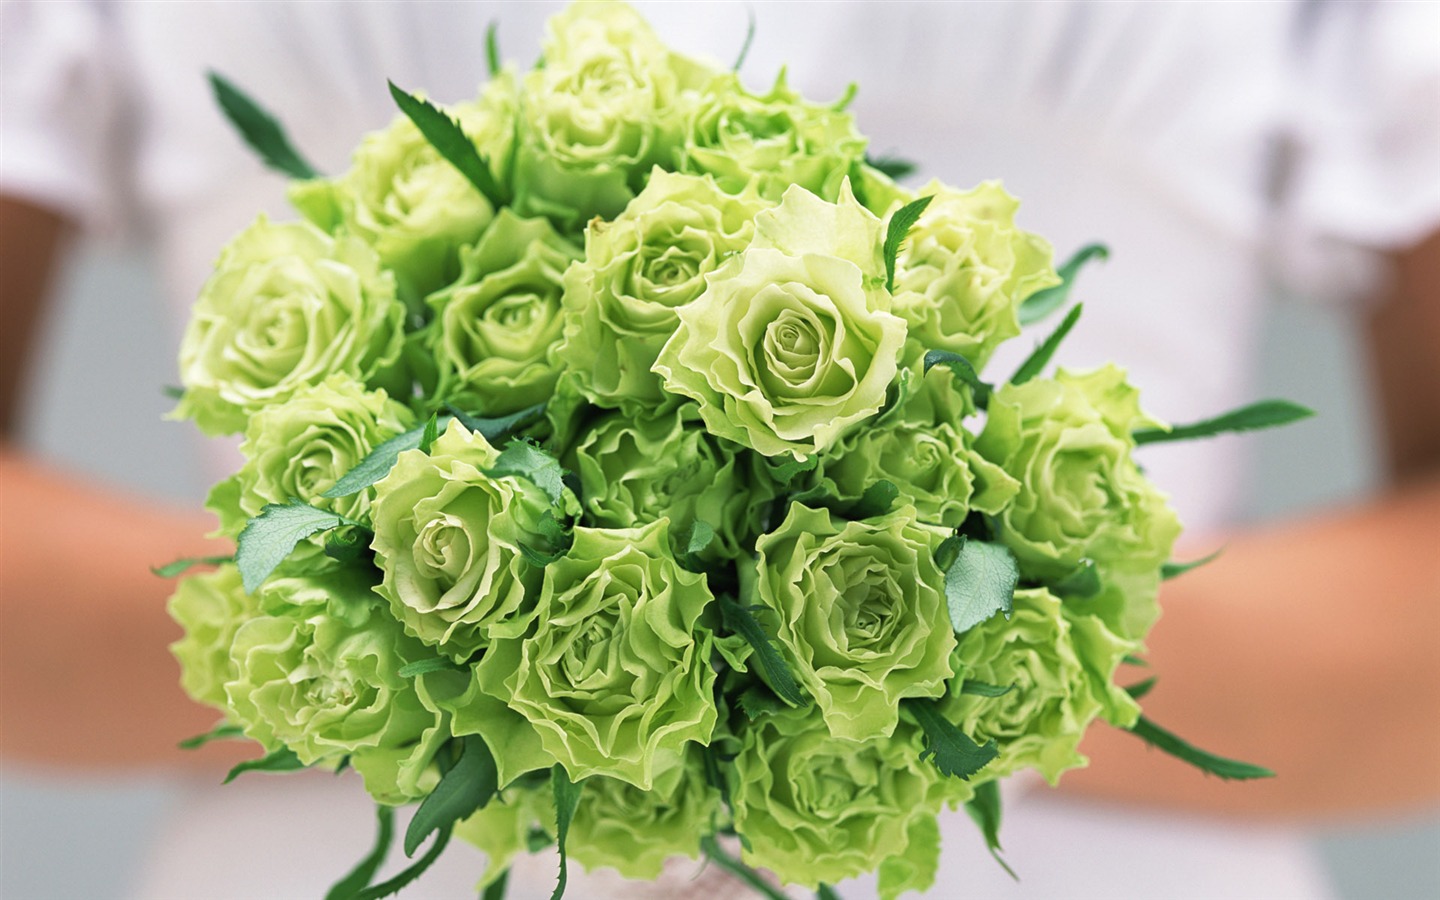 Weddings and Flowers wallpaper (2) #20 - 1440x900